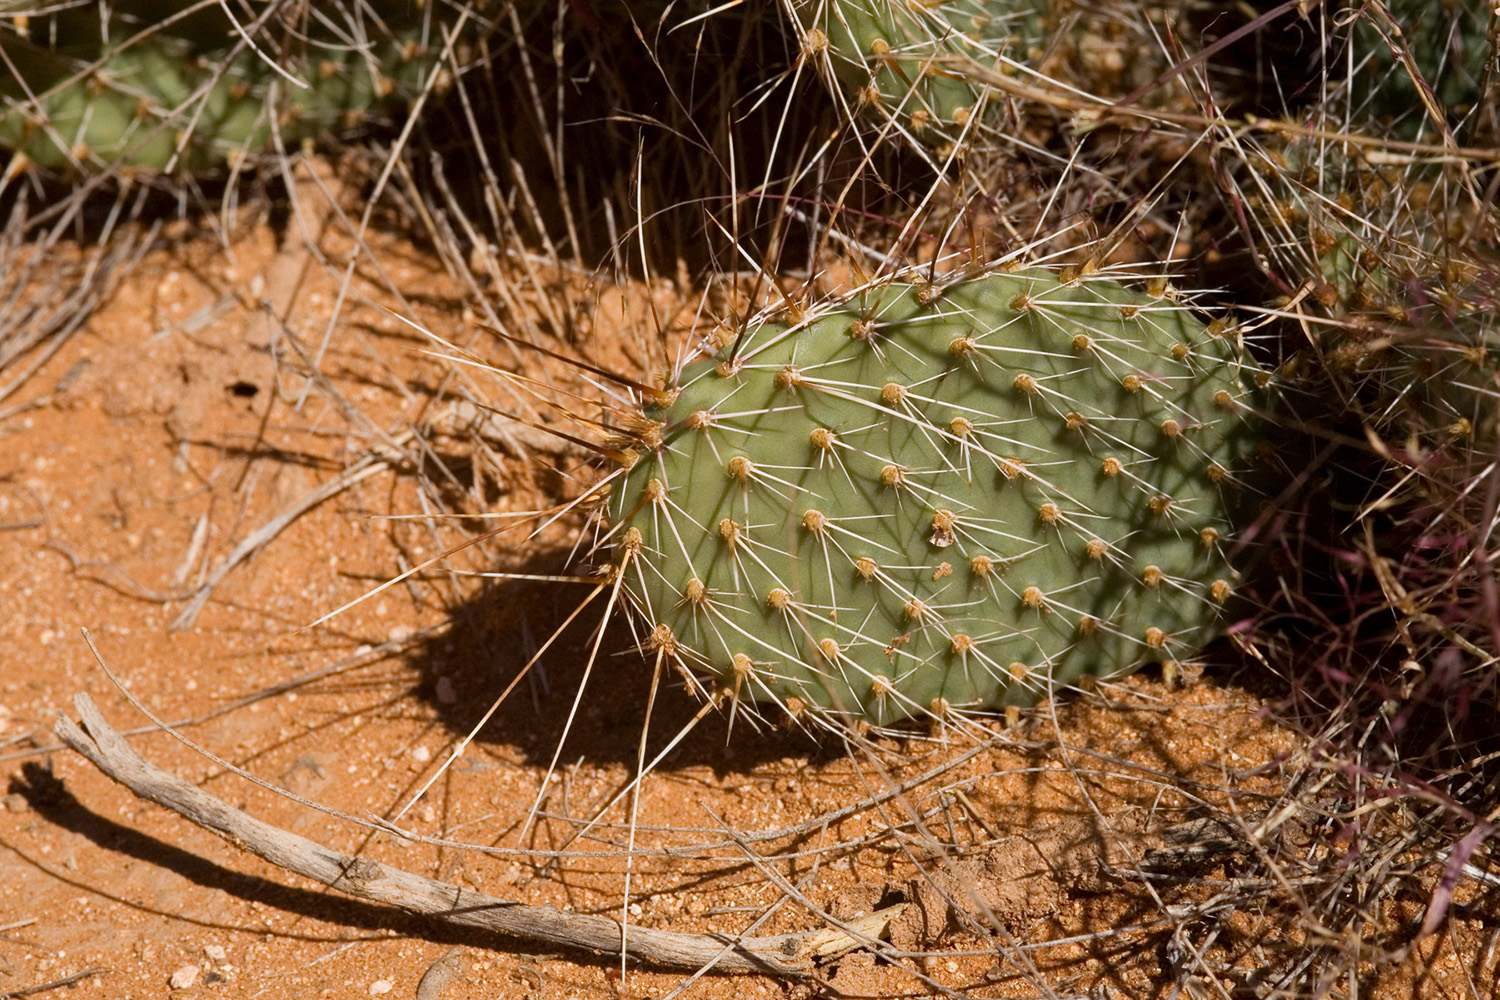 Prickly pear spines can be several inches long, as on this specimen of Opuntia polyacantha var. polyacantha!